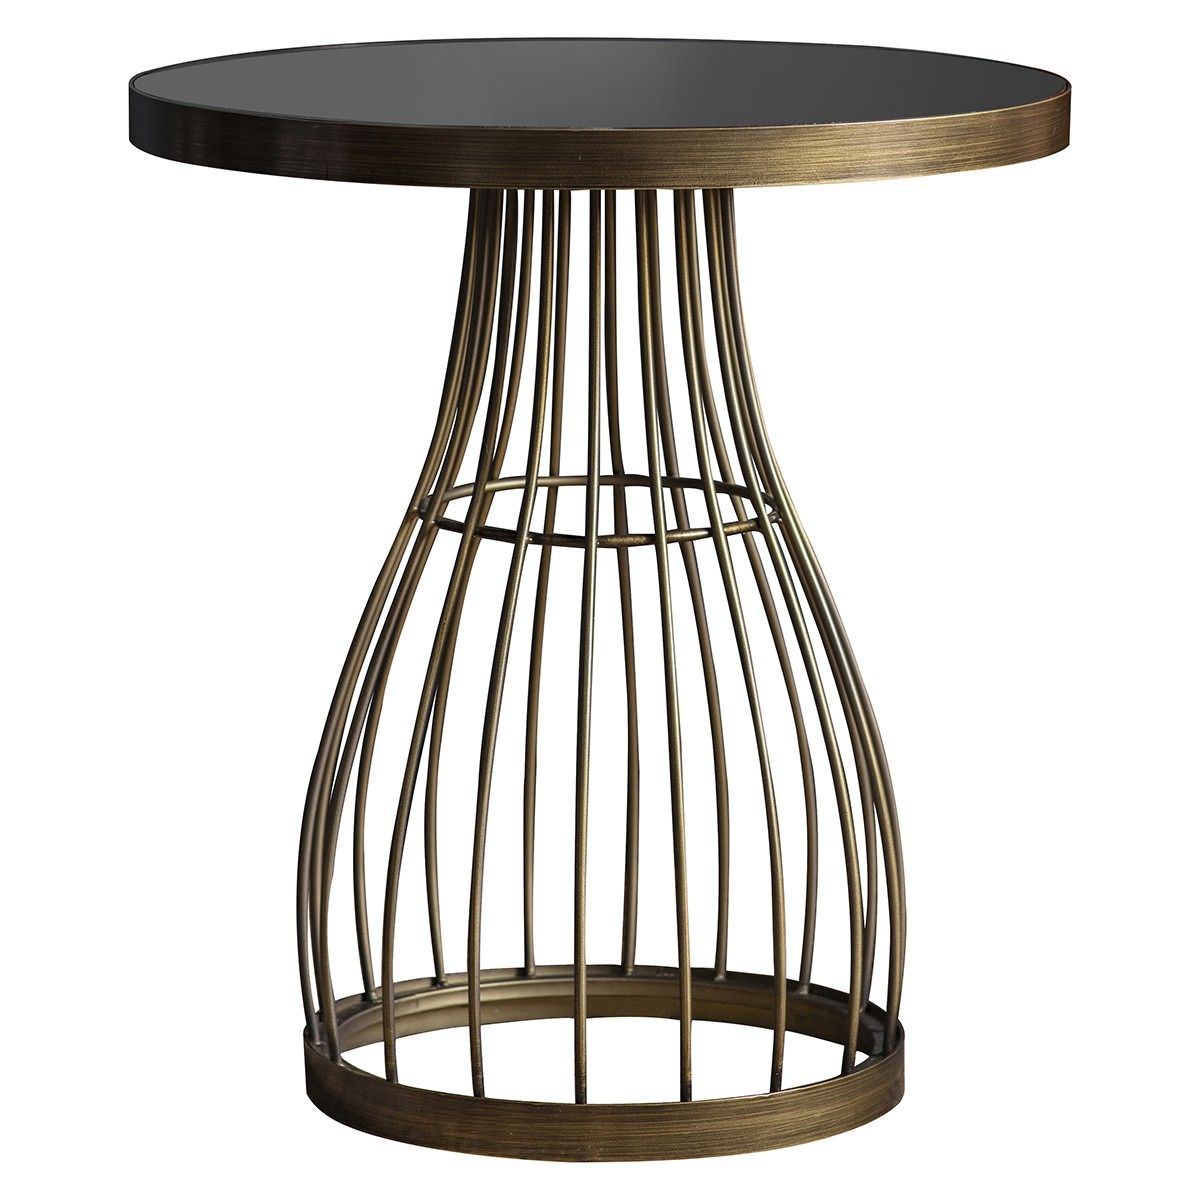 Paddy Metal Round Side Table, Black / Antique Brass In Antique Brass Round Console Tables (Gallery 19 of 20)